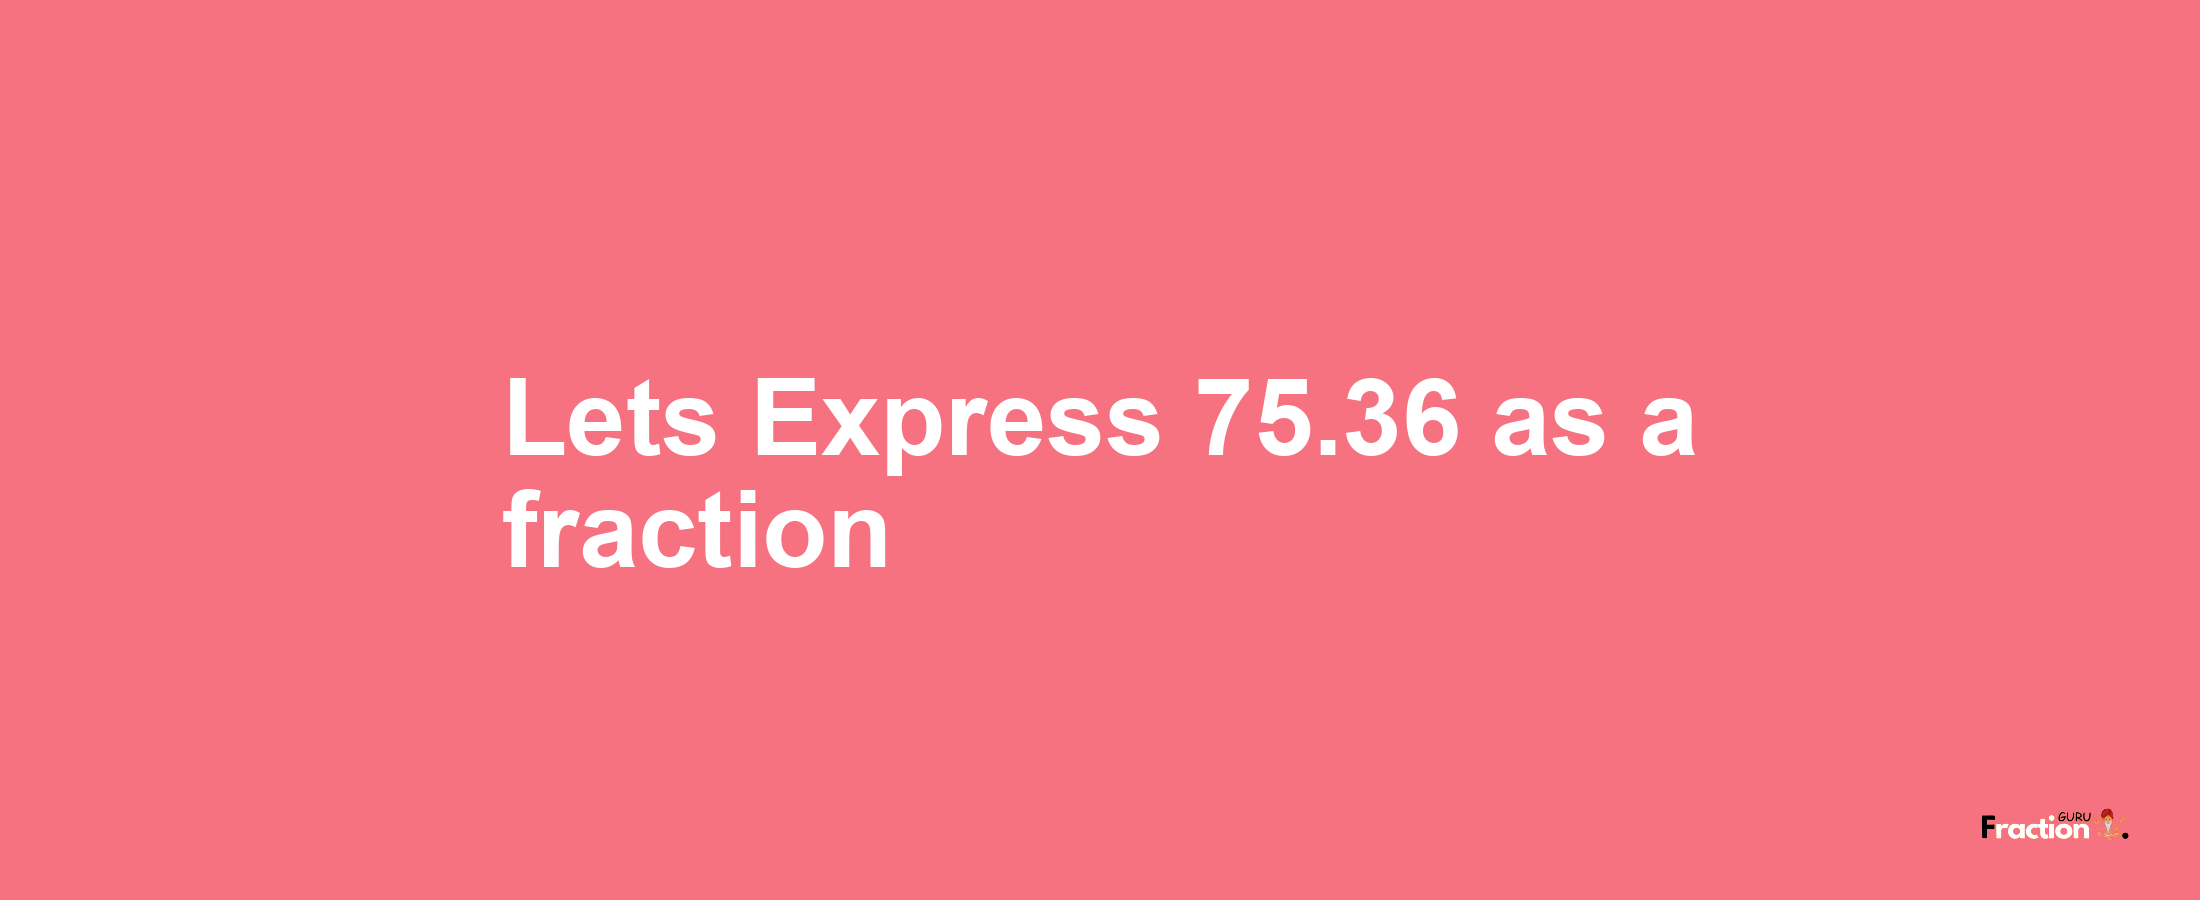 Lets Express 75.36 as afraction